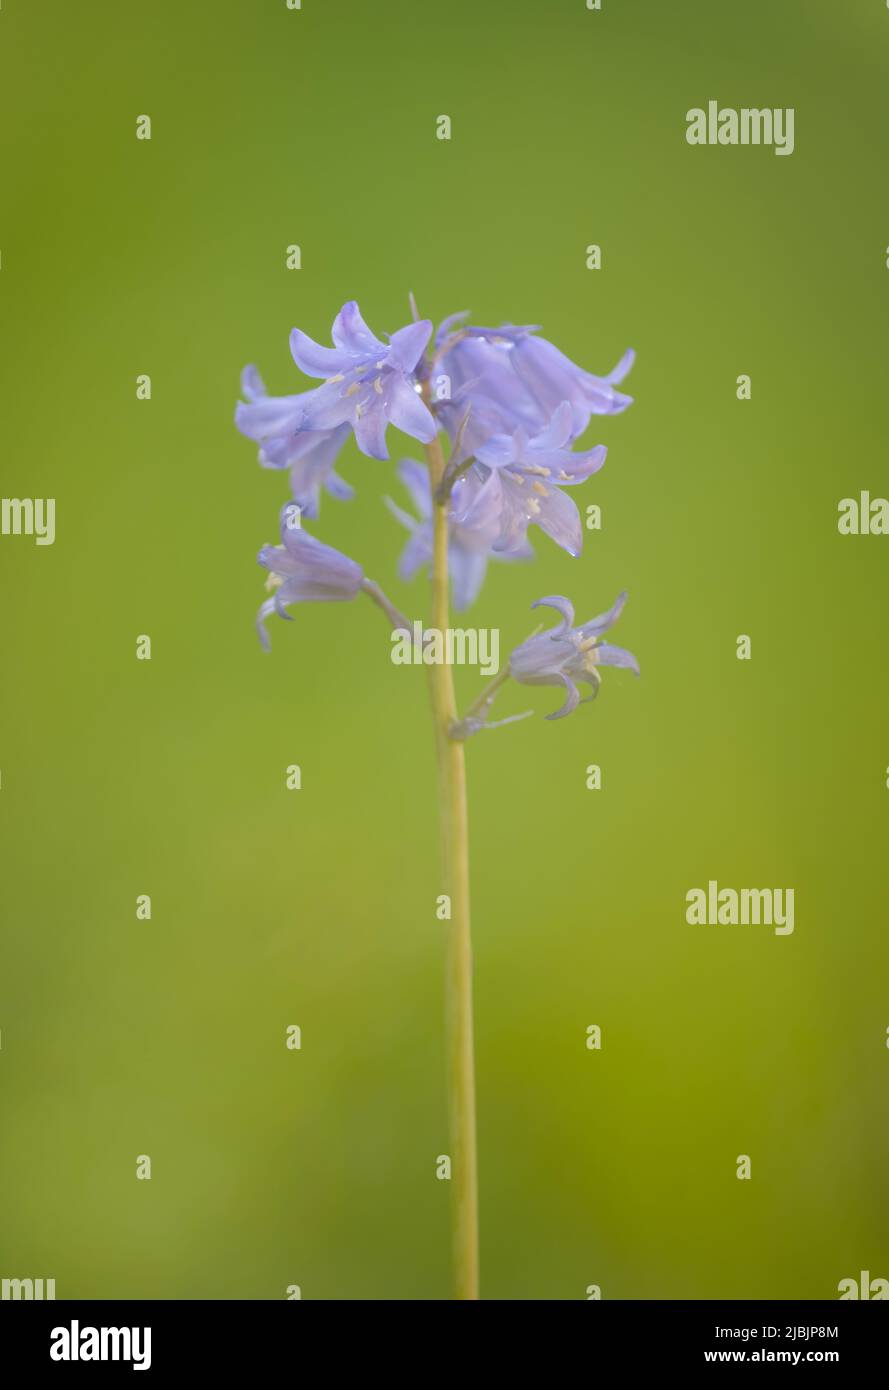 A beautiful Bluebell flower, (Hyacinthoides non-scripta), photographed against a plain green foliage background Stock Photo